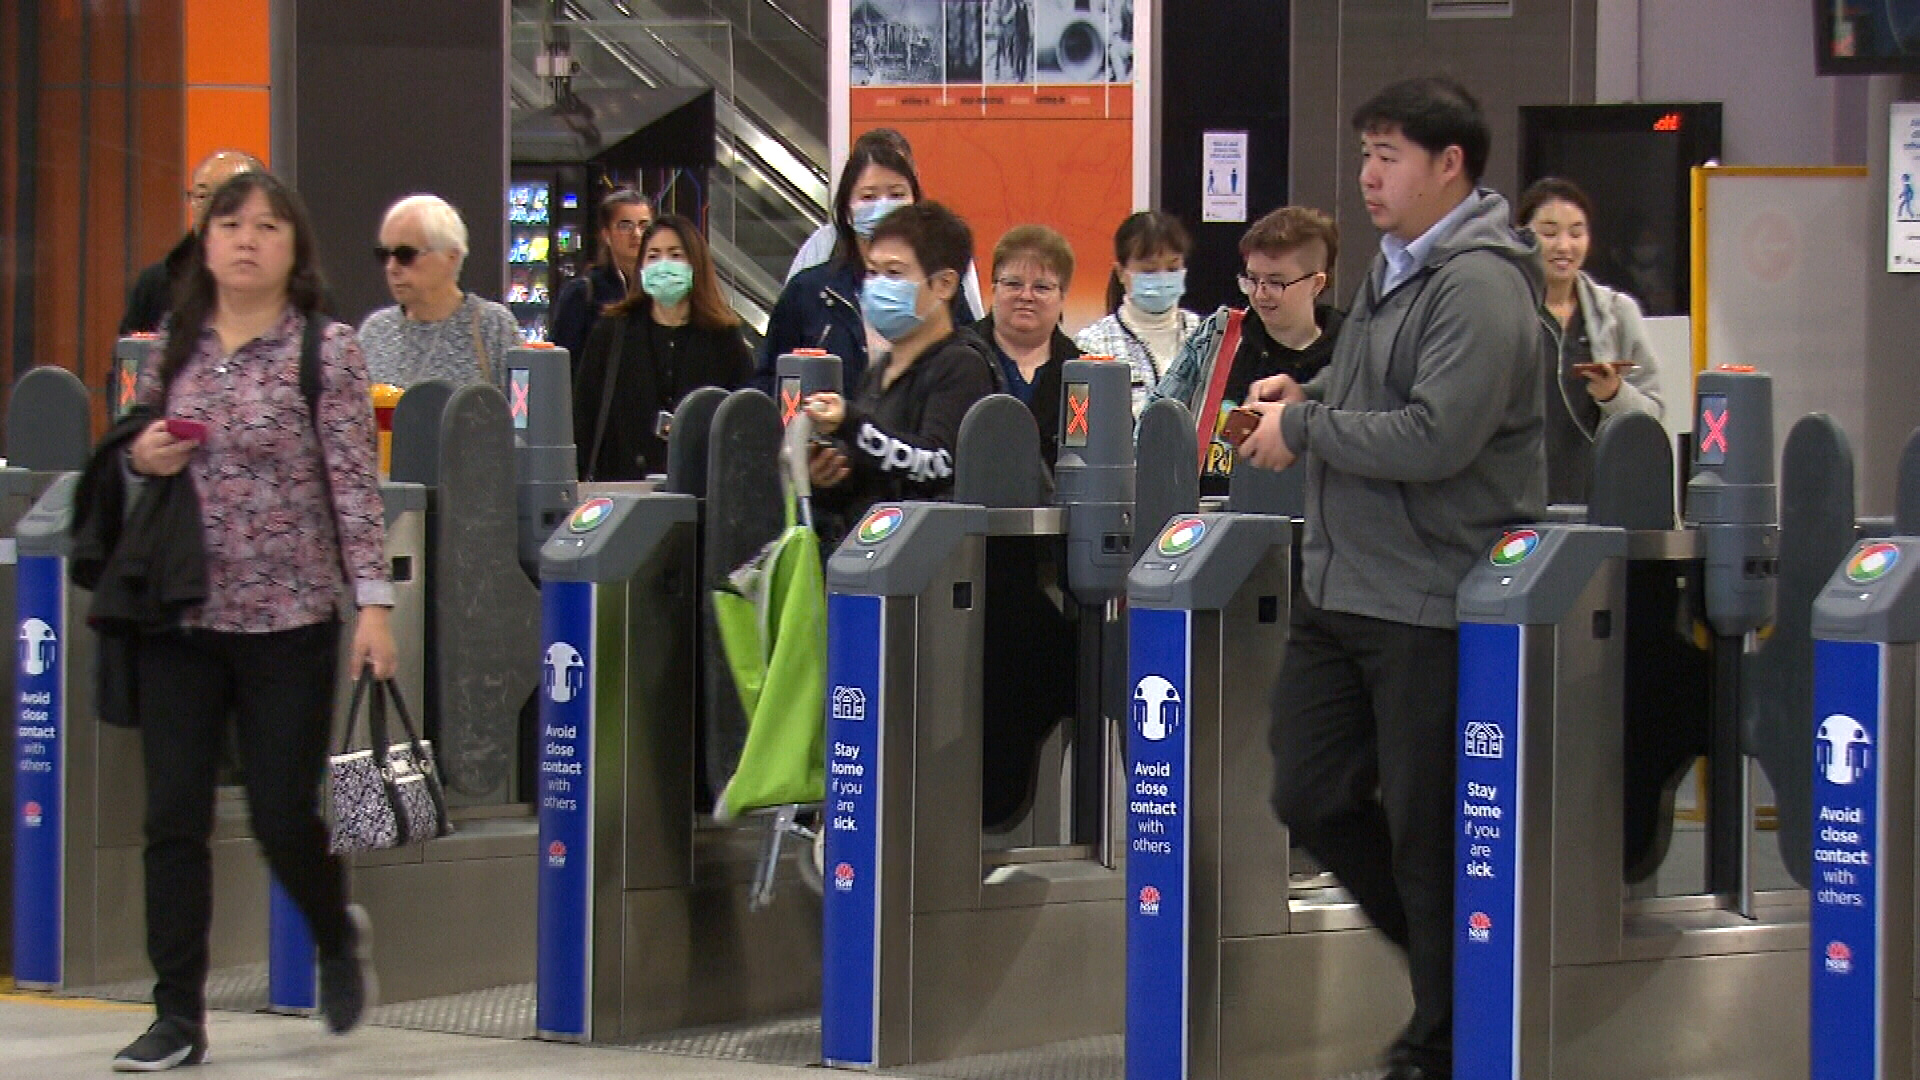 Sydney commuters at Chatswood train station in May, some wearing face masks, make their way to the platform to try and board a train.